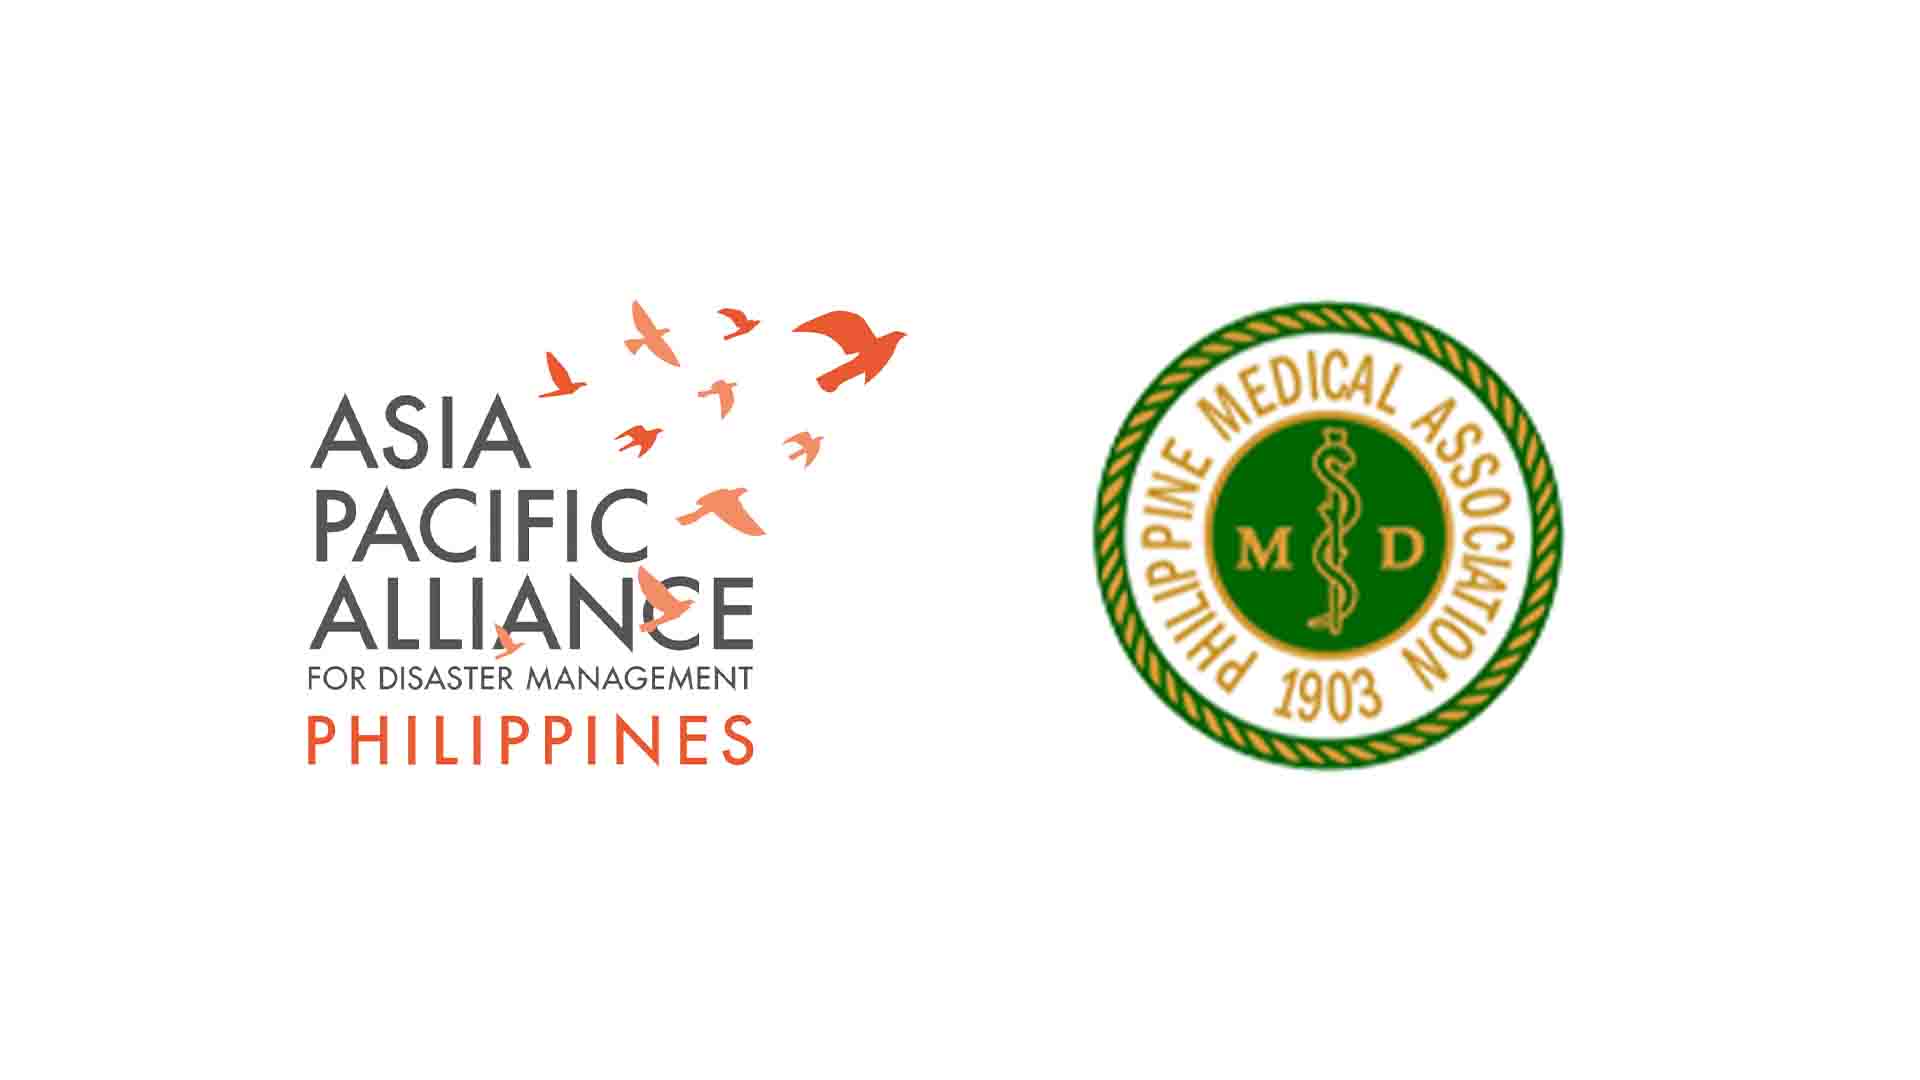 A-PAD PH, PMA achieves milestone in Regional Medical Consultation for Emergency Medical Aid and Care